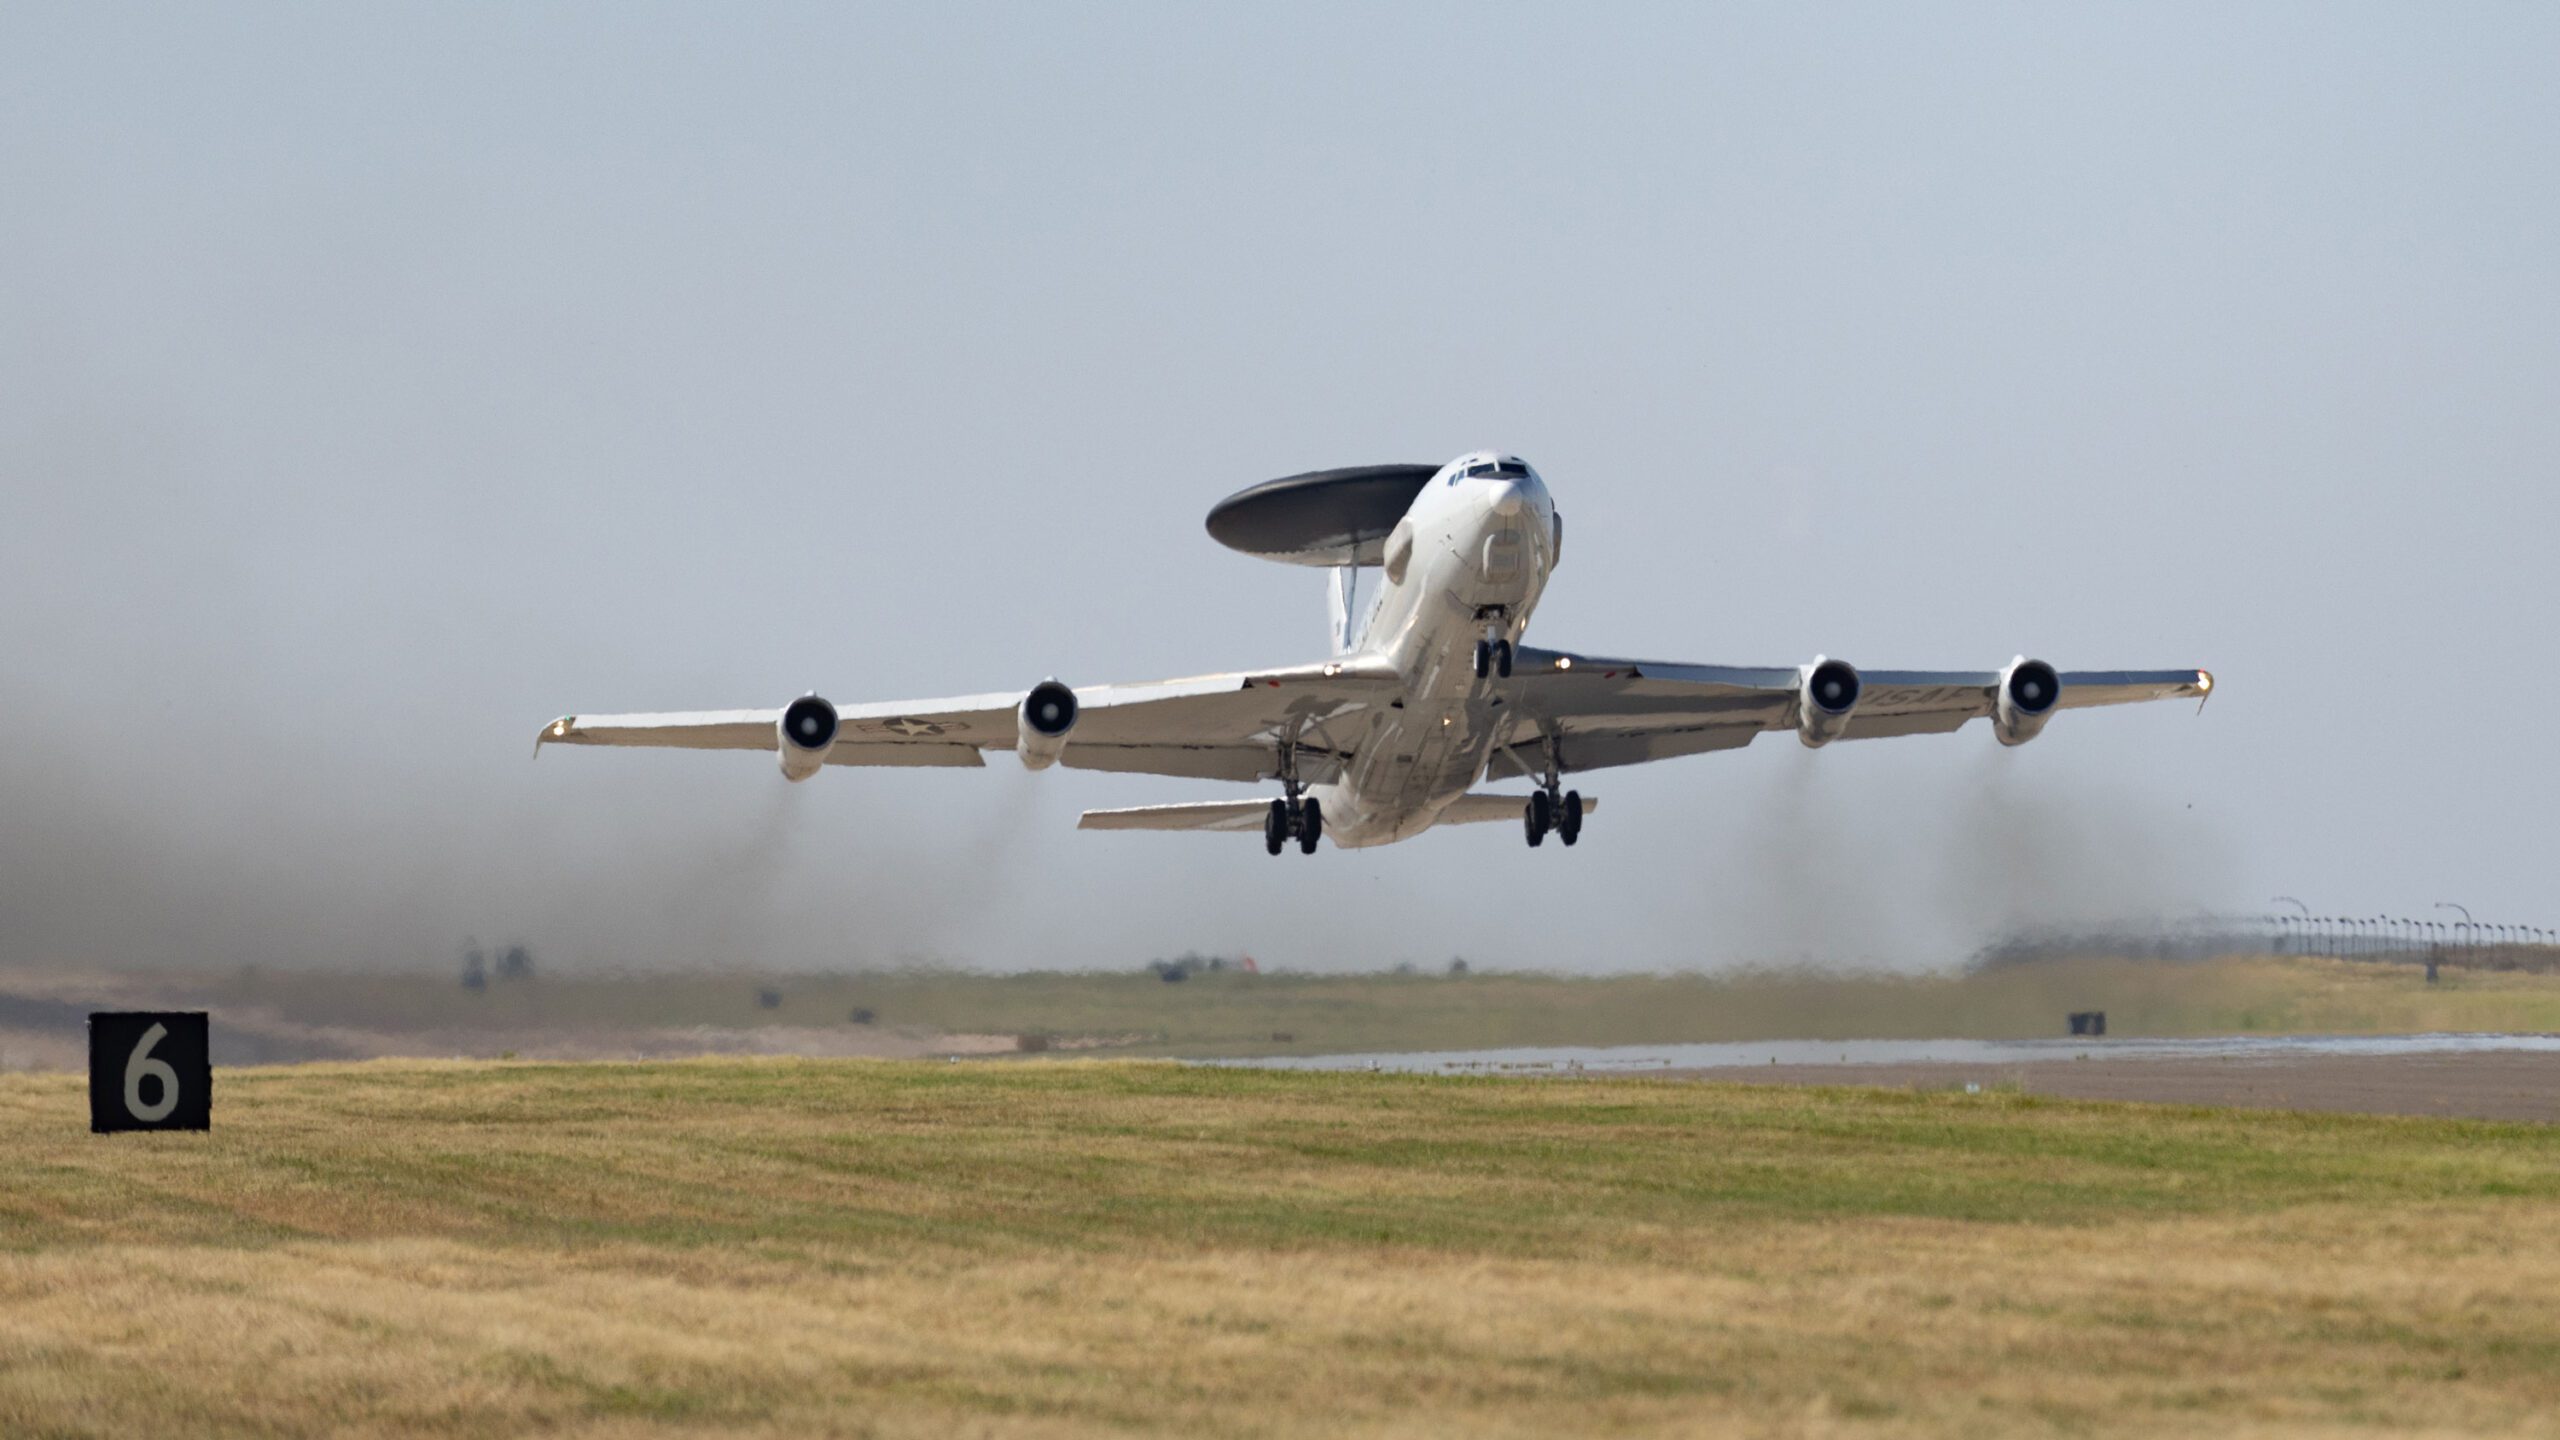 With the loss of its tenth aircraft, the USAF is moving forward with retiring its E-3 Sentry